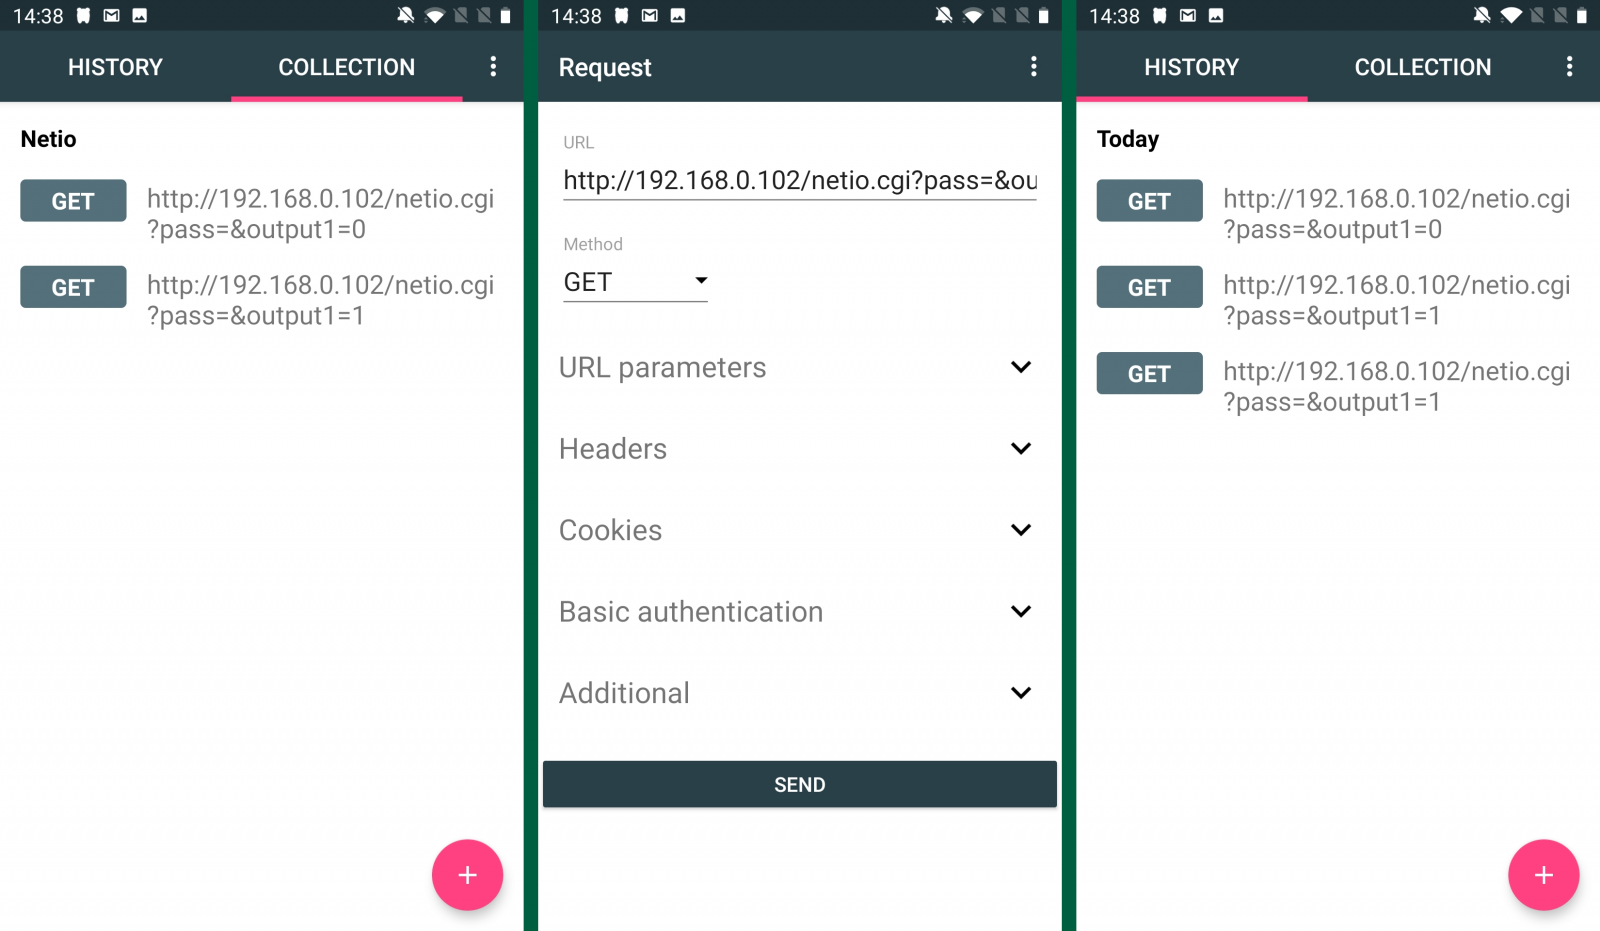 Screenshots of Advanced Rest API Client, android app for controlling NETIO networked smart power sockets